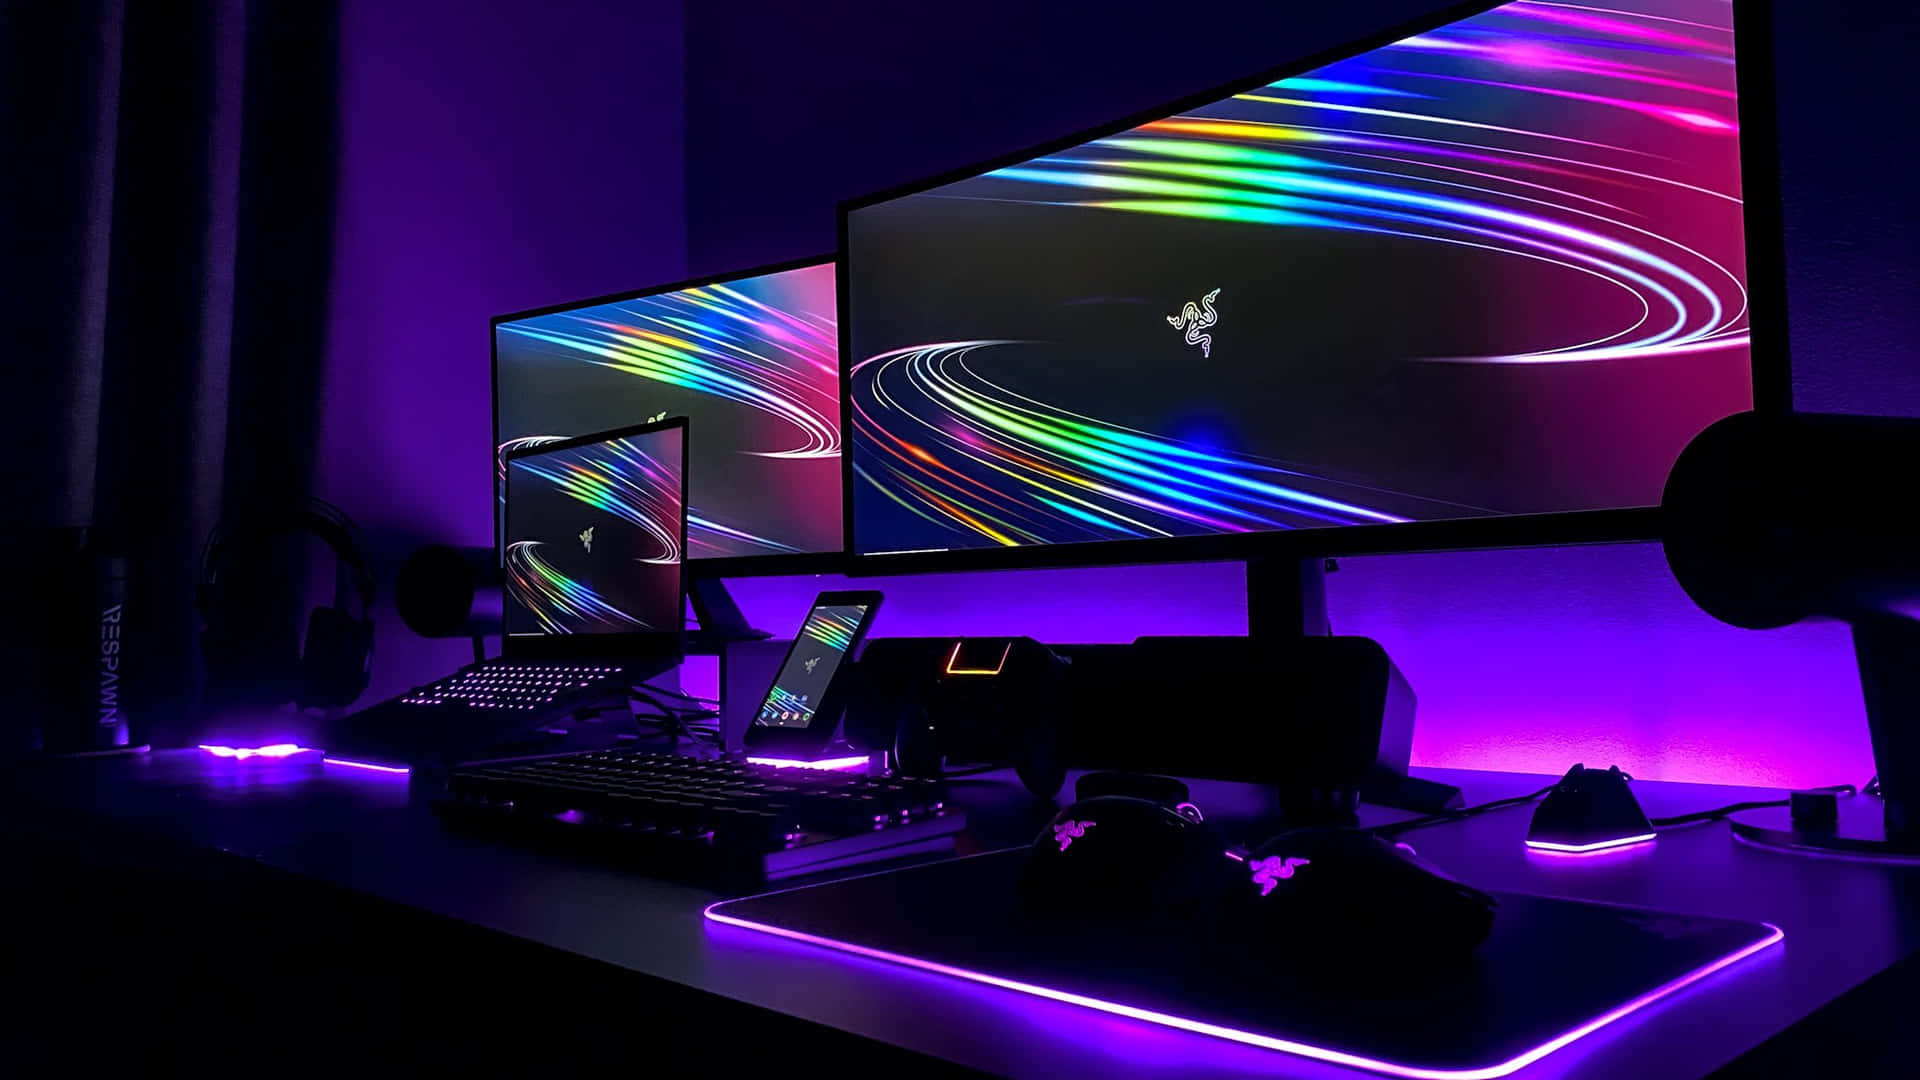 Step up your battle station with the Razer gaming range